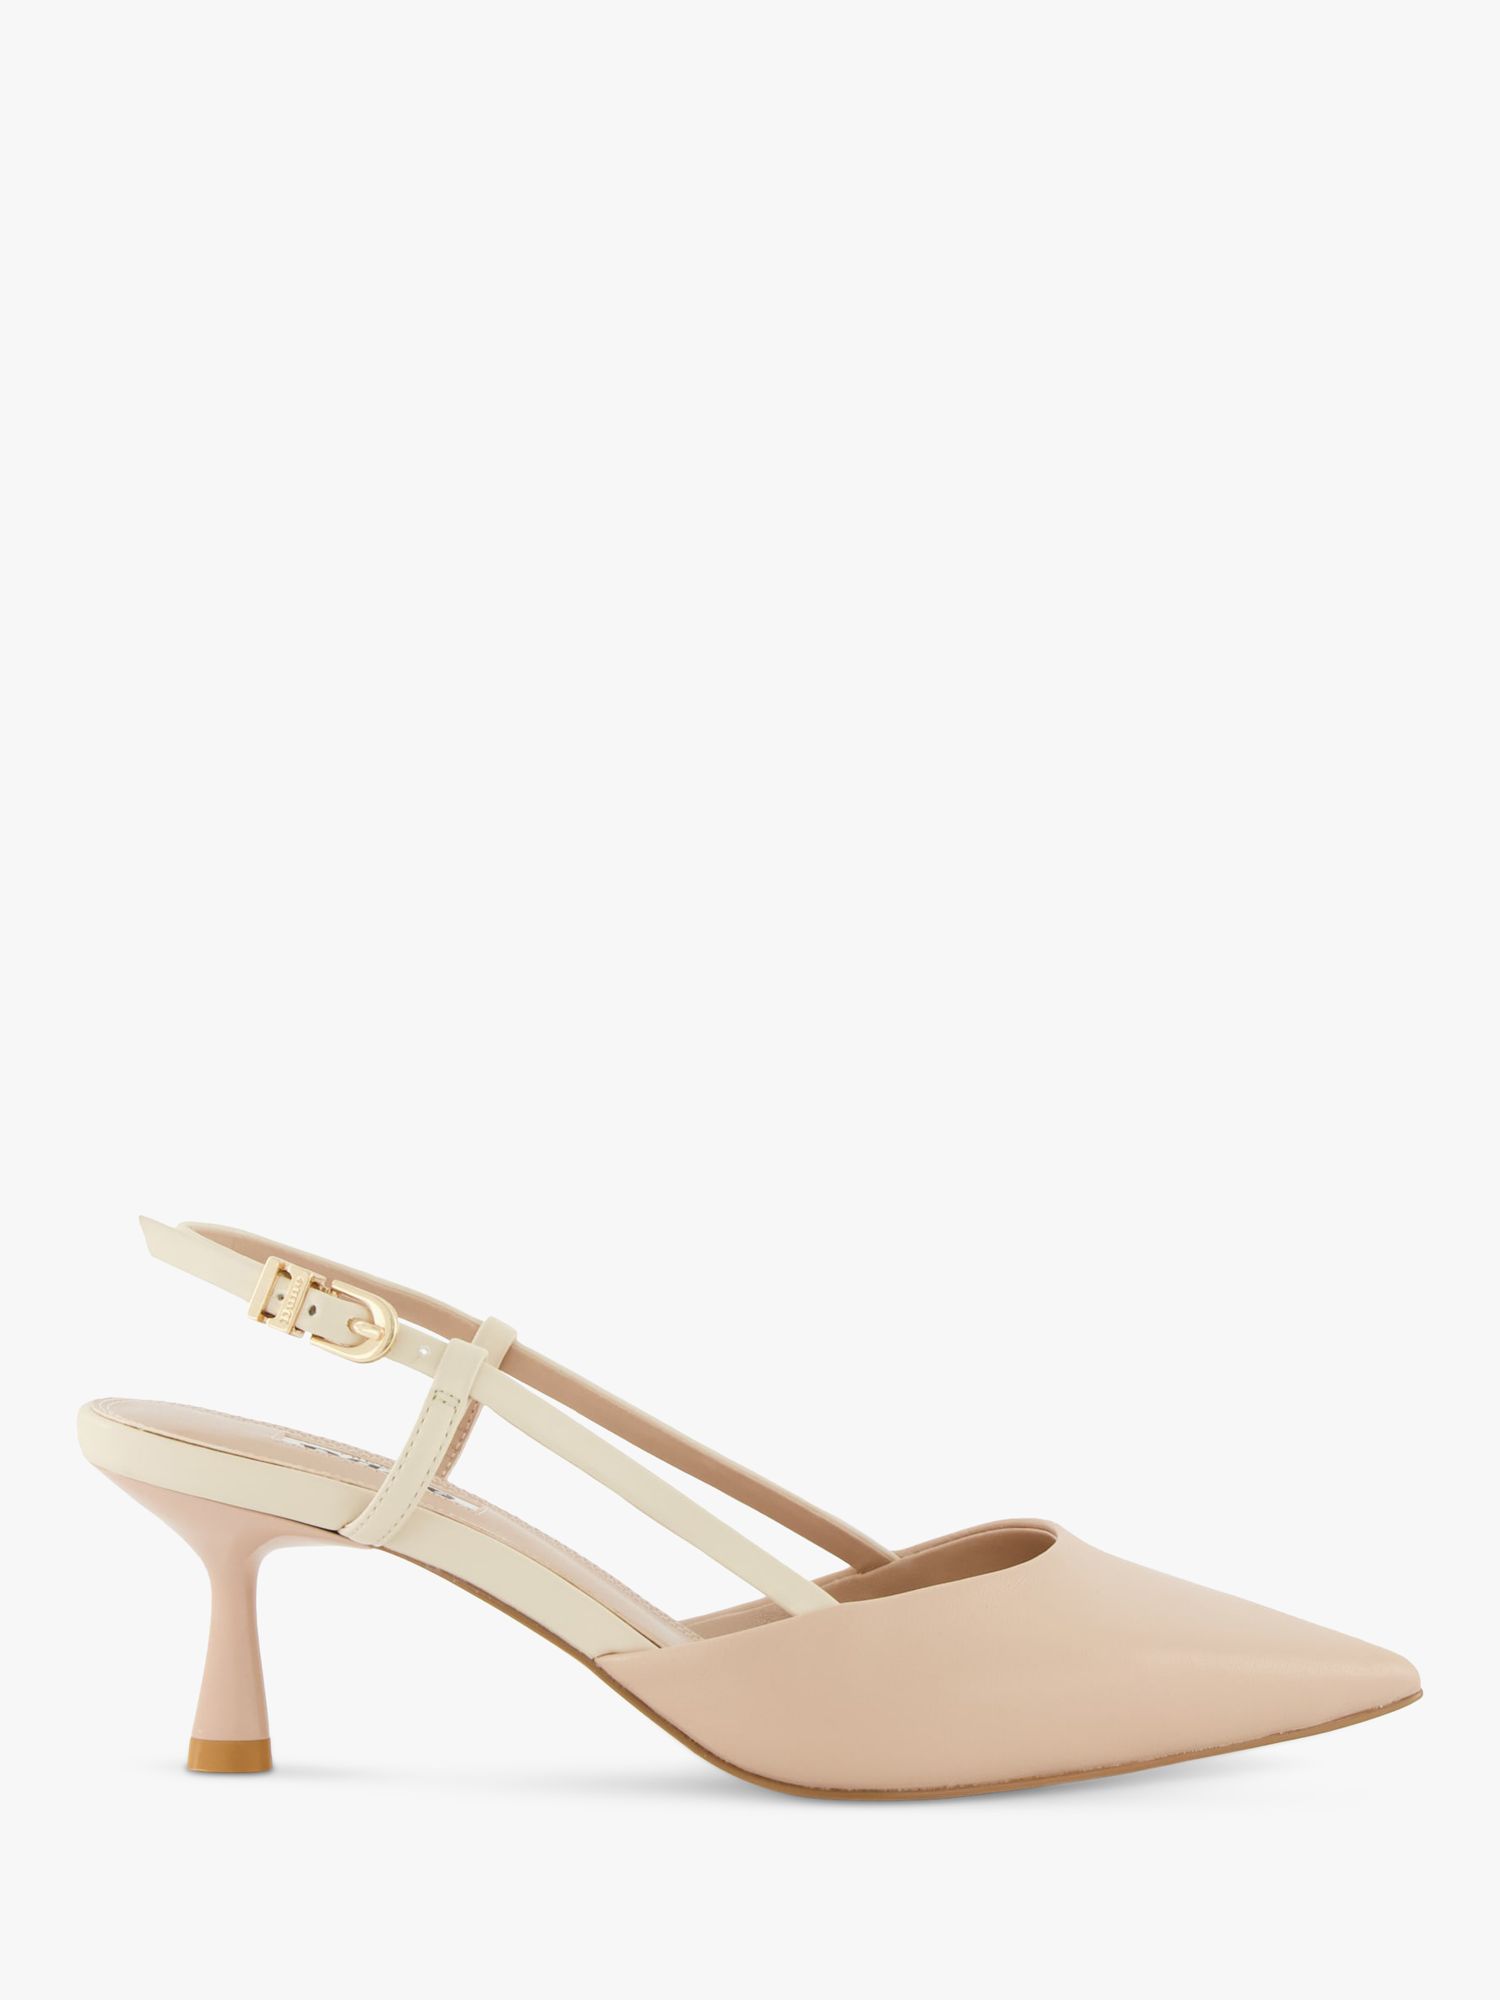 Dune Classify Slingback Leather Court Shoes, Nude, 3